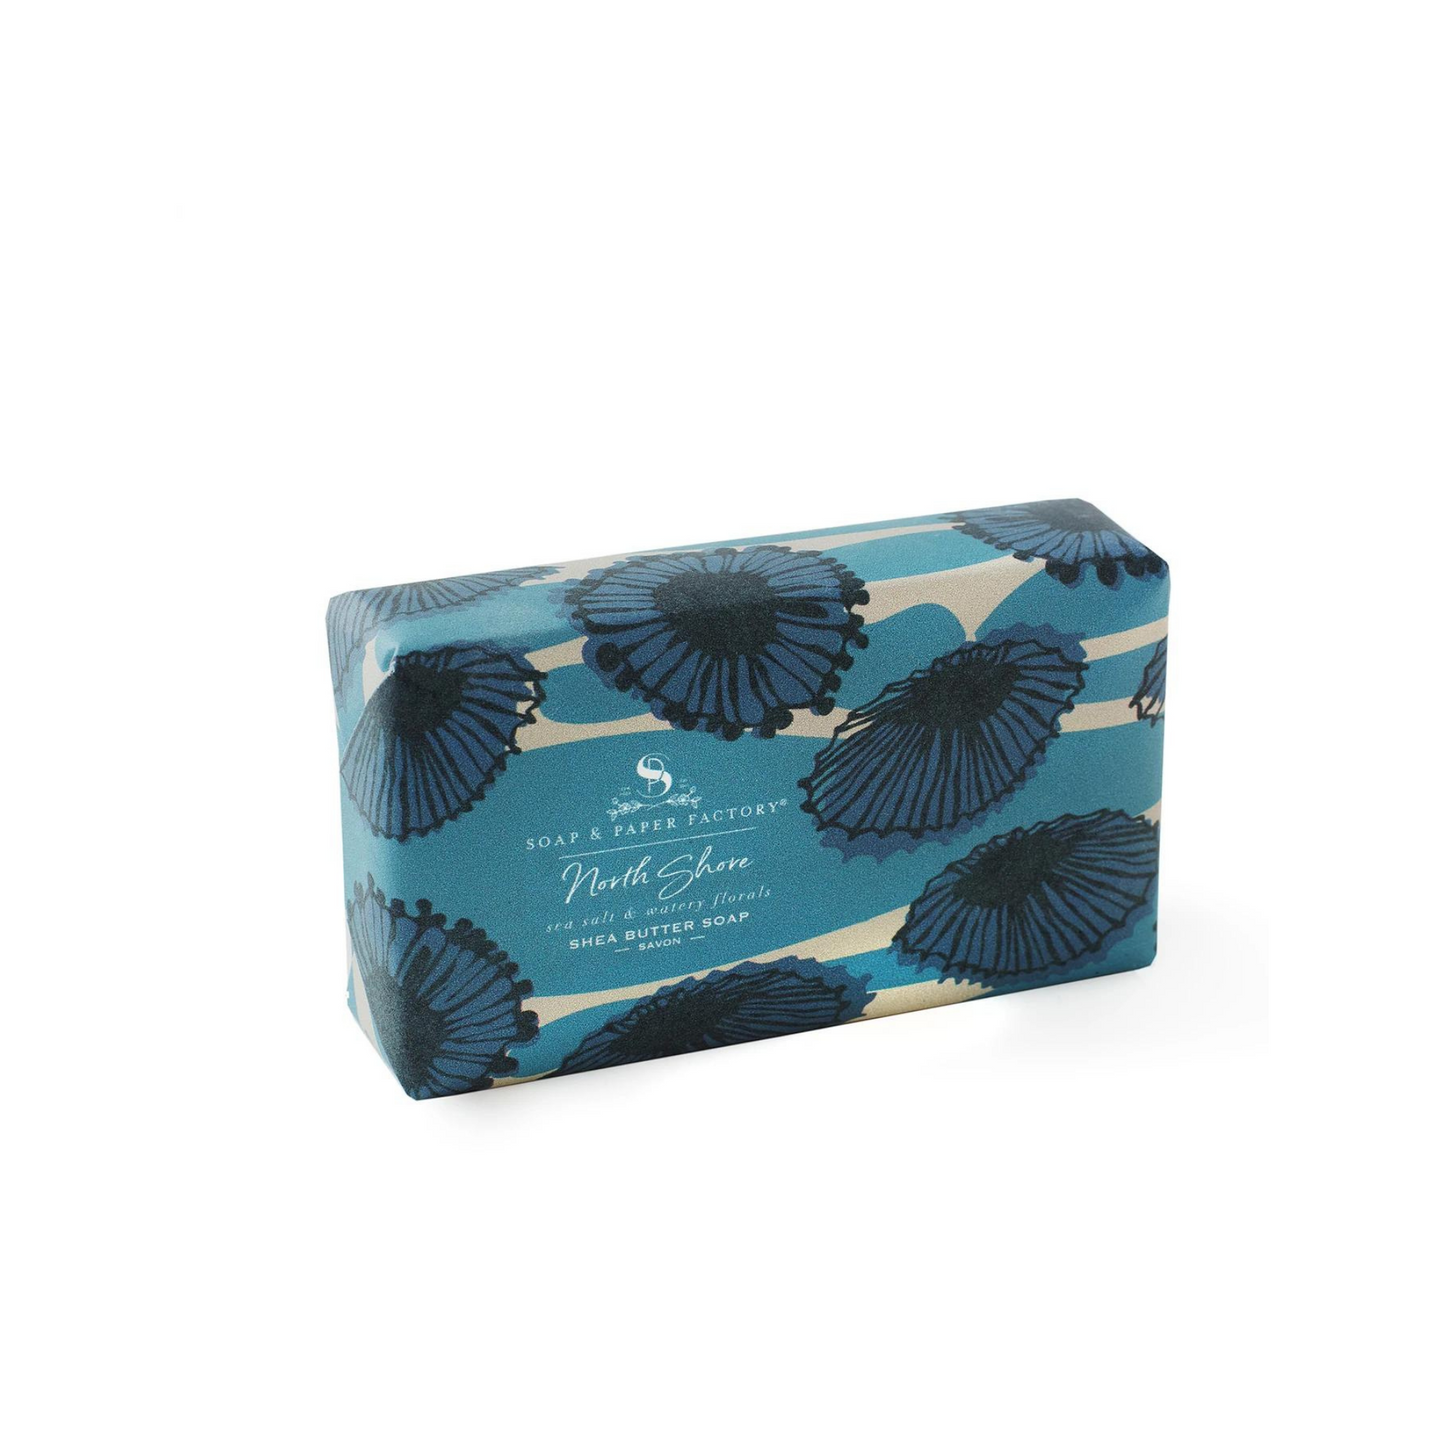 Primary Image of North Shore Shea Butter Soap Bar